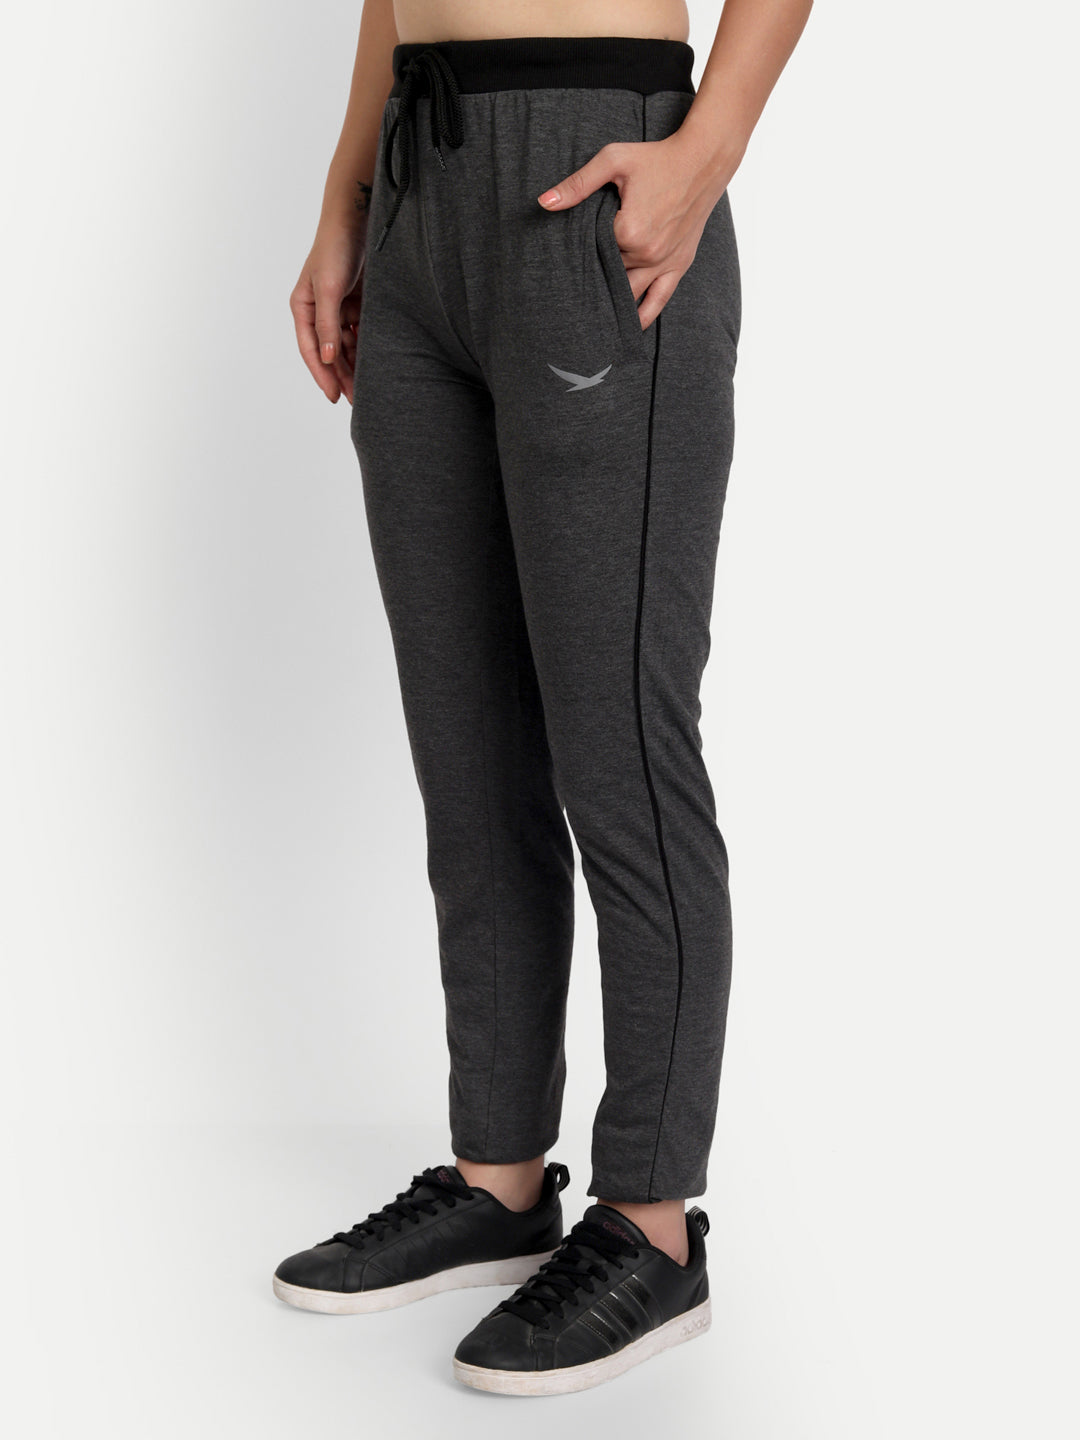 HRX Women Track Pants Upto 80% Off from Rs.299 at Best Price